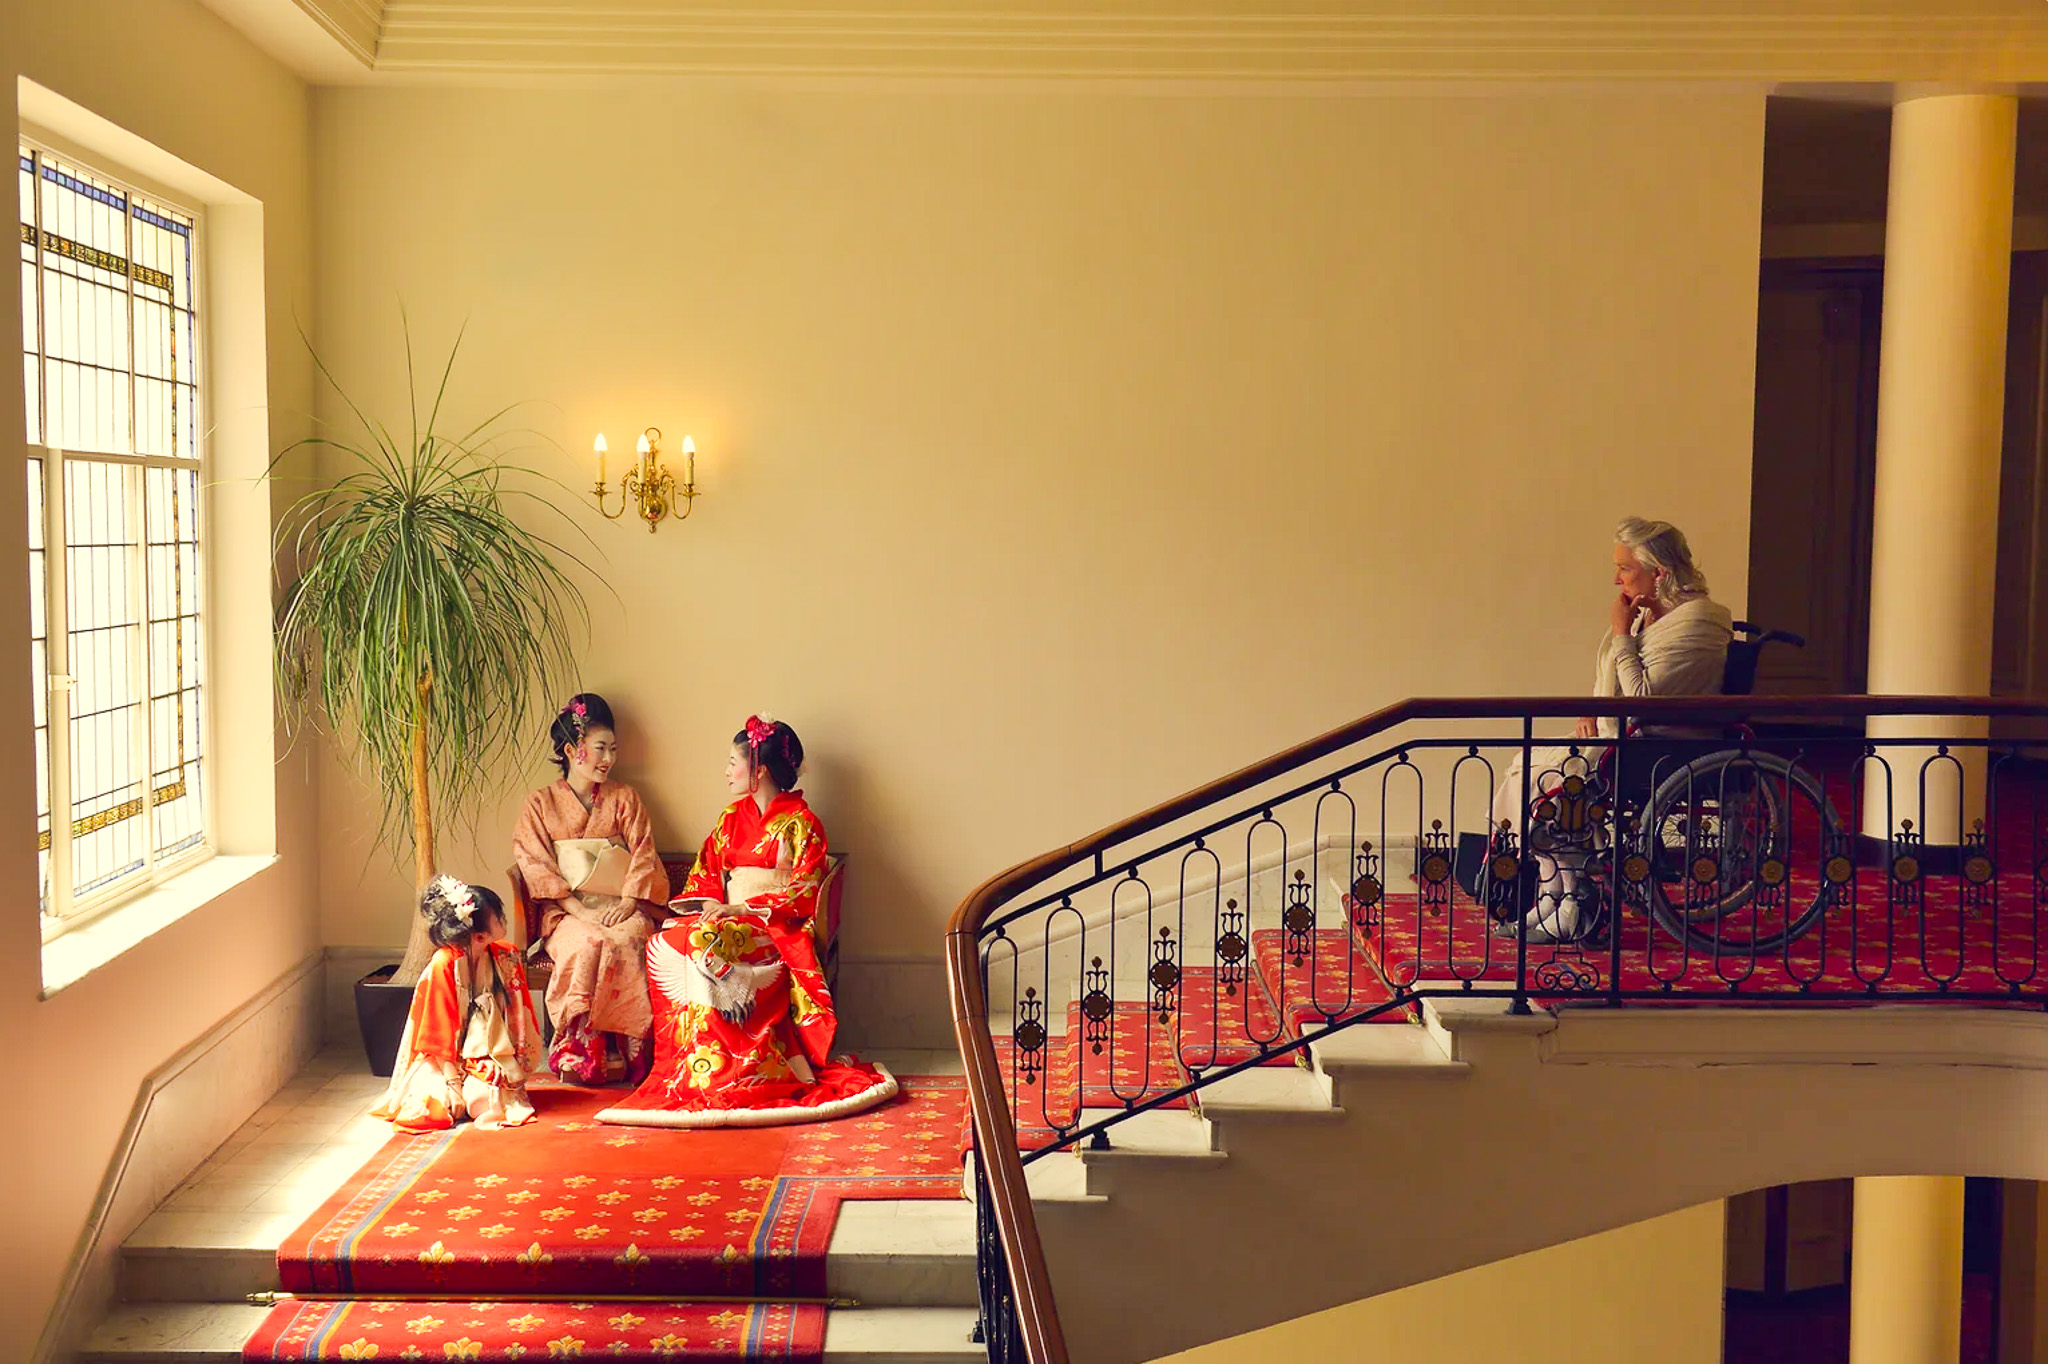 Hallucinations, an artwork by Amaia Salazar. An old woman in a wheelchair looks on at two women and a child in traditional Japanese dress sat on a staircase.